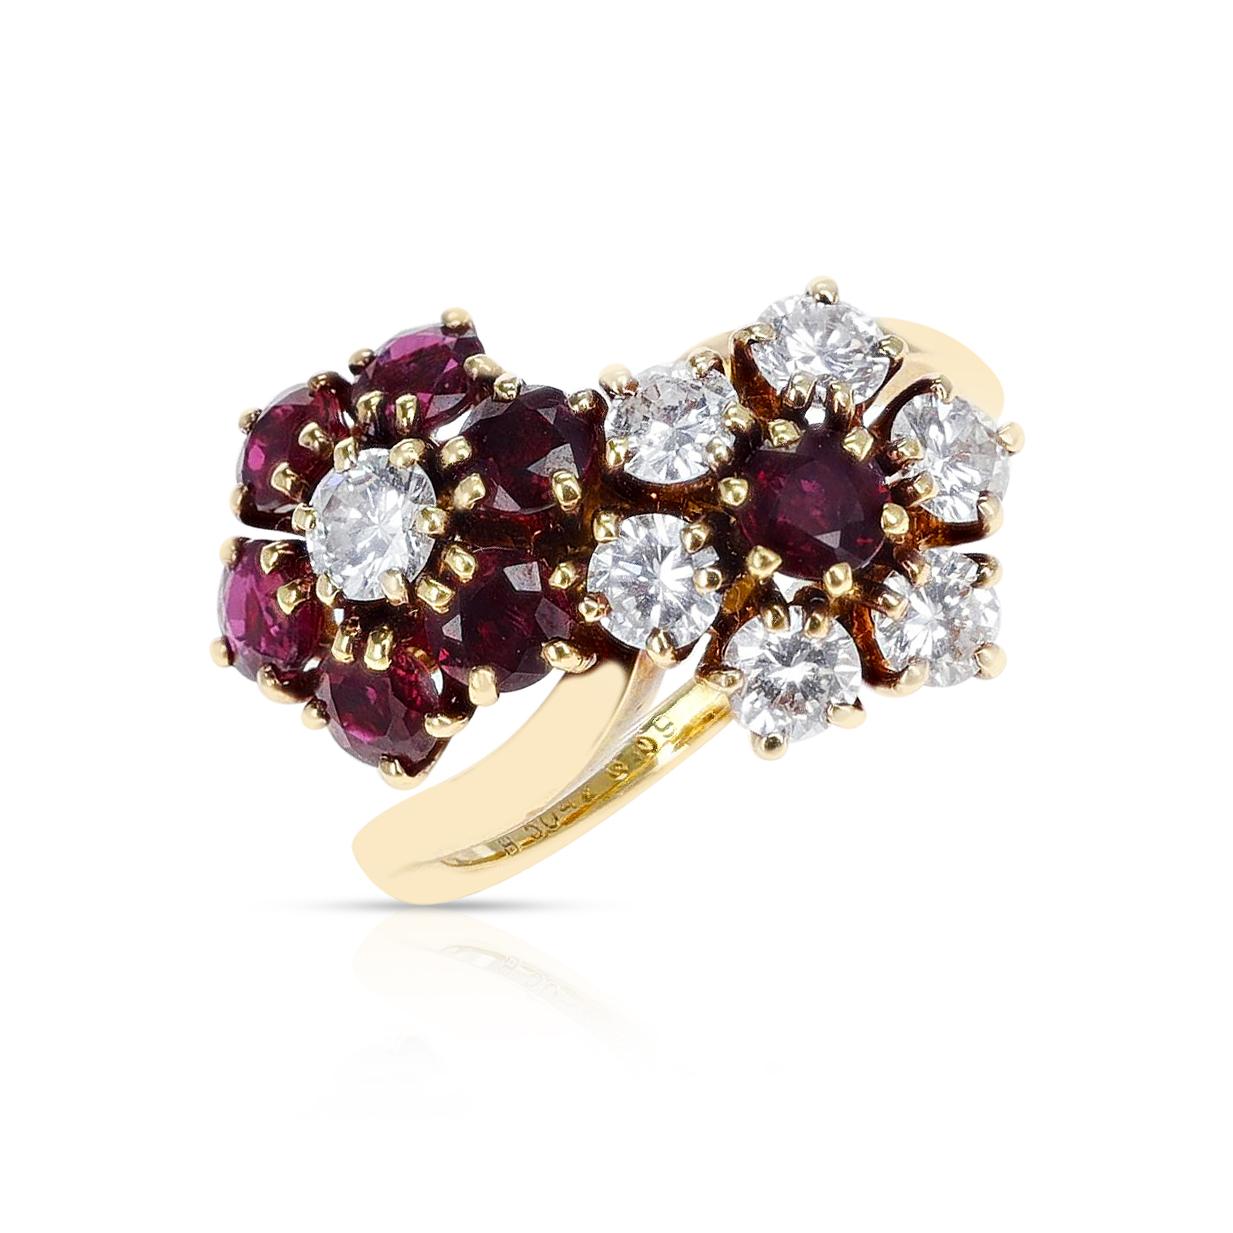 A romantic Van Cleef & Arpels Double Floral Ruby and Diamond Toi et Moi Ring made in 18k Yellow Gold. Ring Size US 5.25. The total weight is 5.86 grams. 